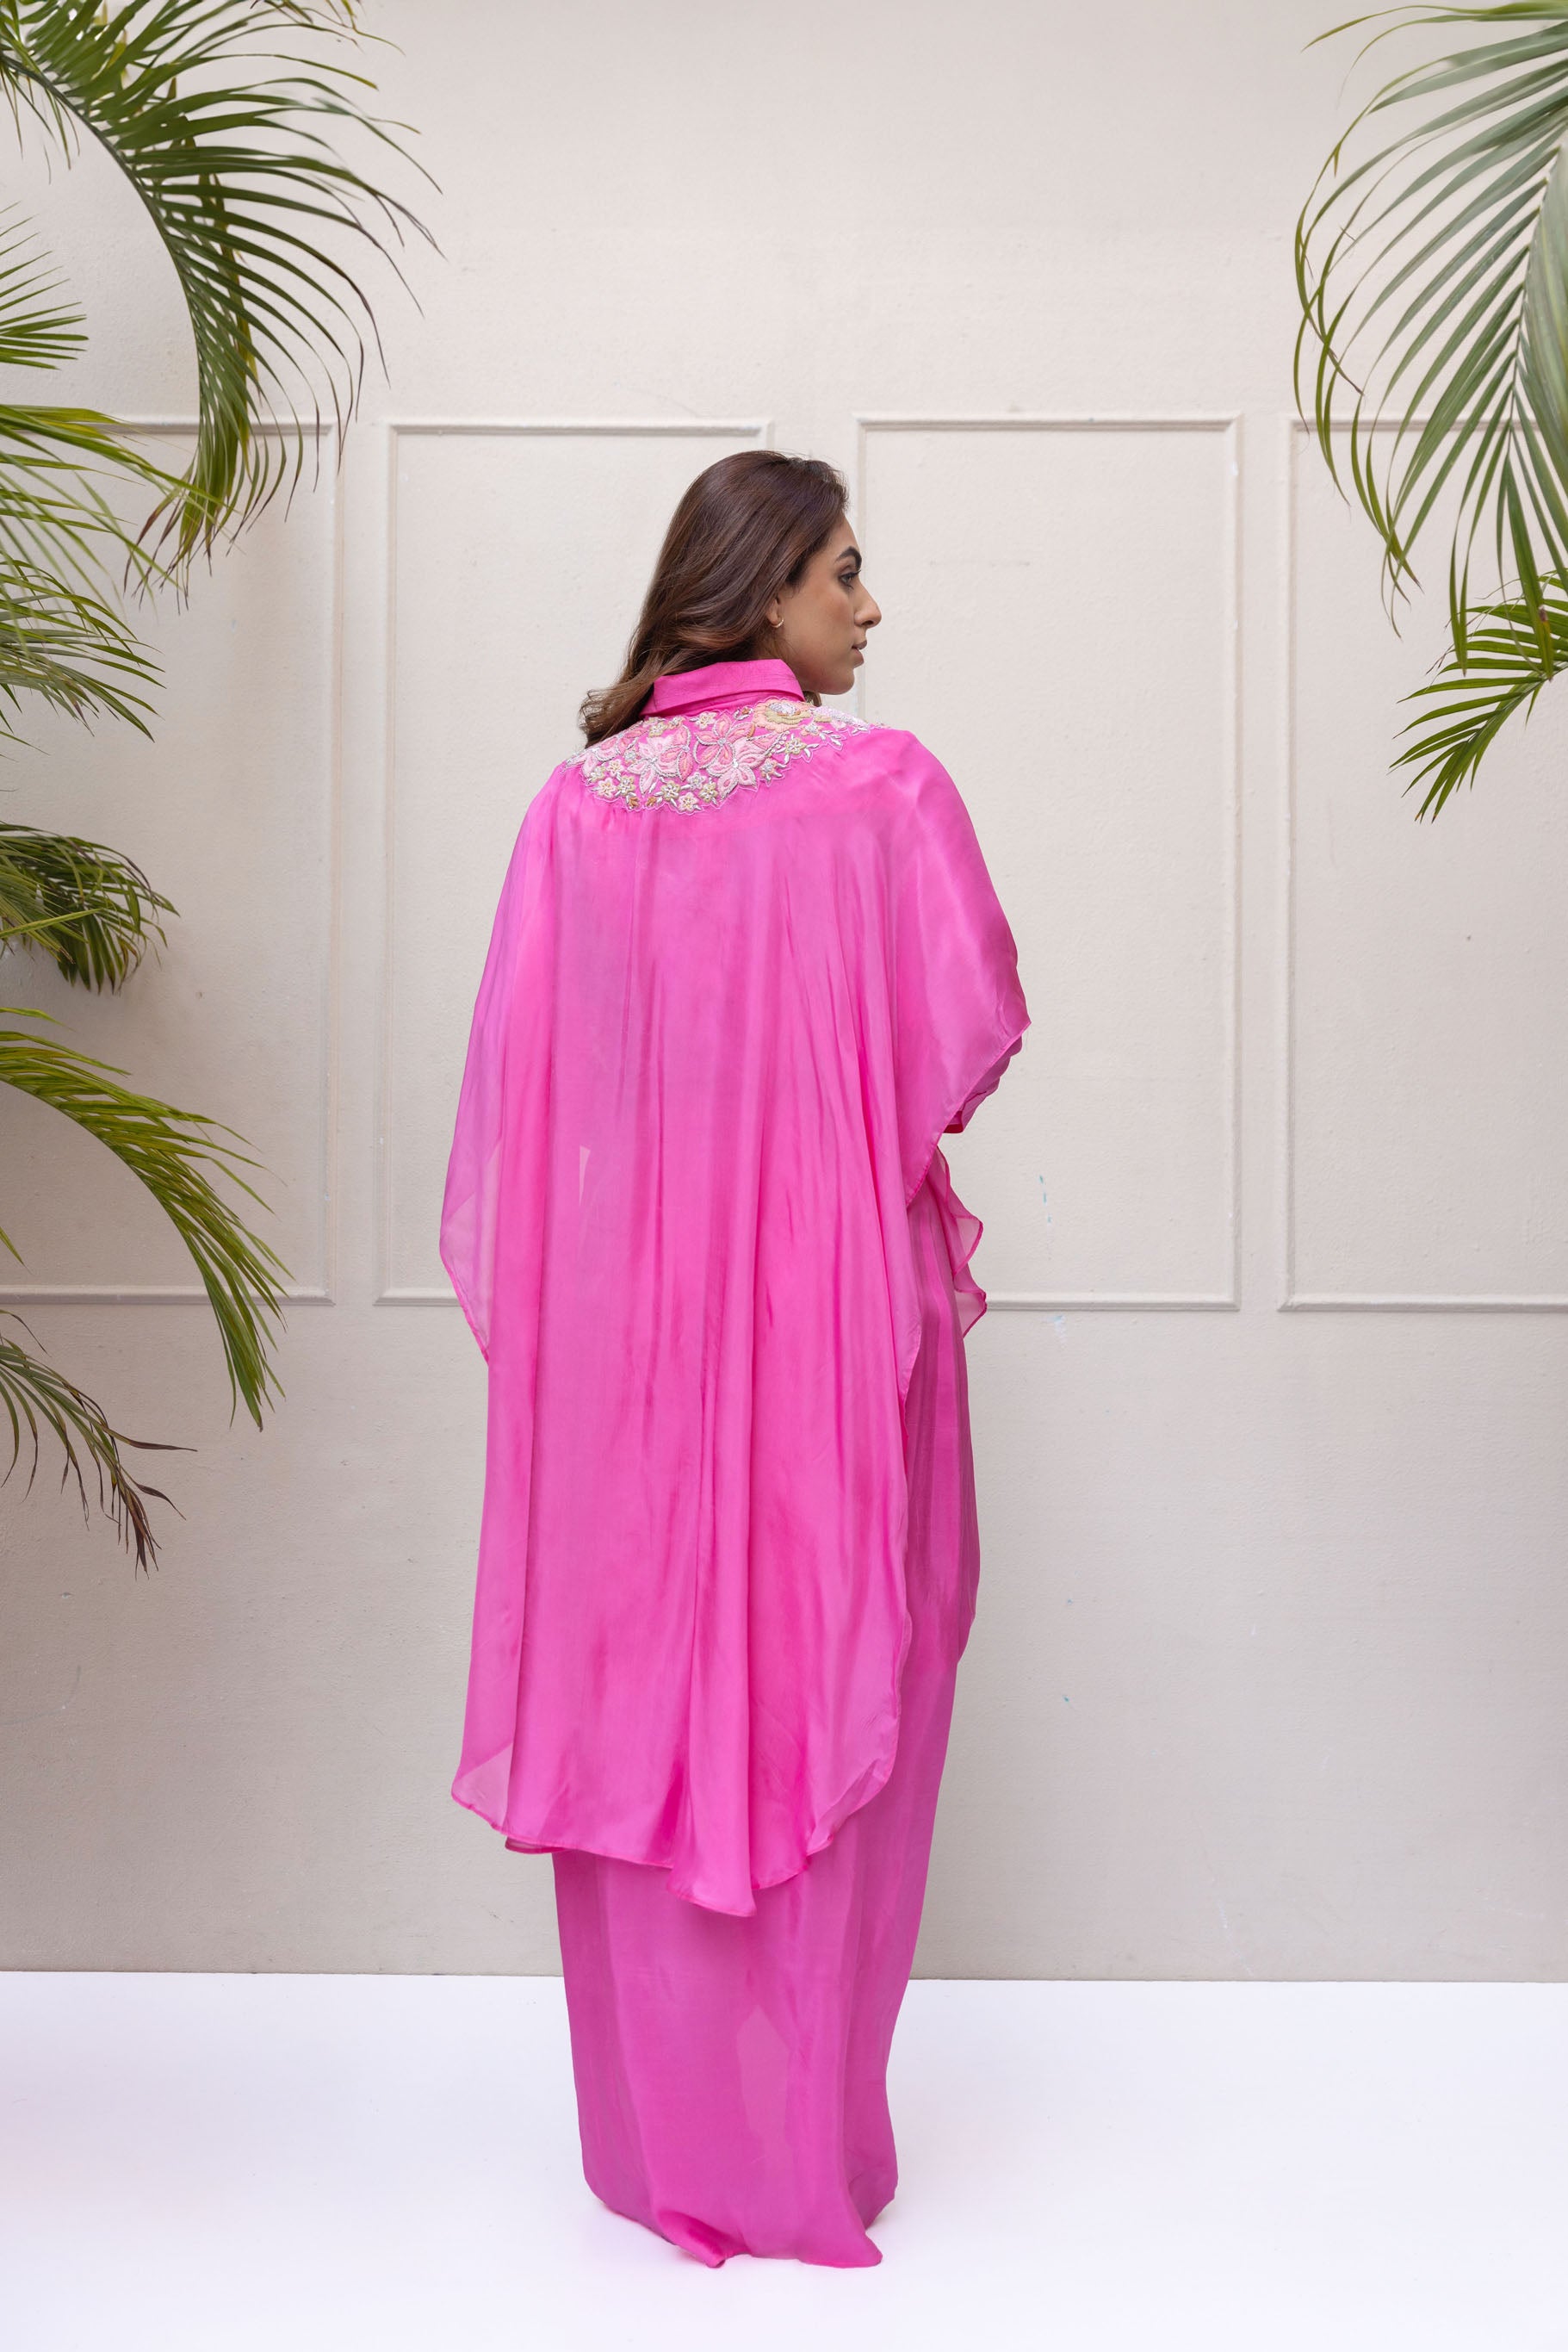 Fuchsia pink draped skirt with cape and shirt